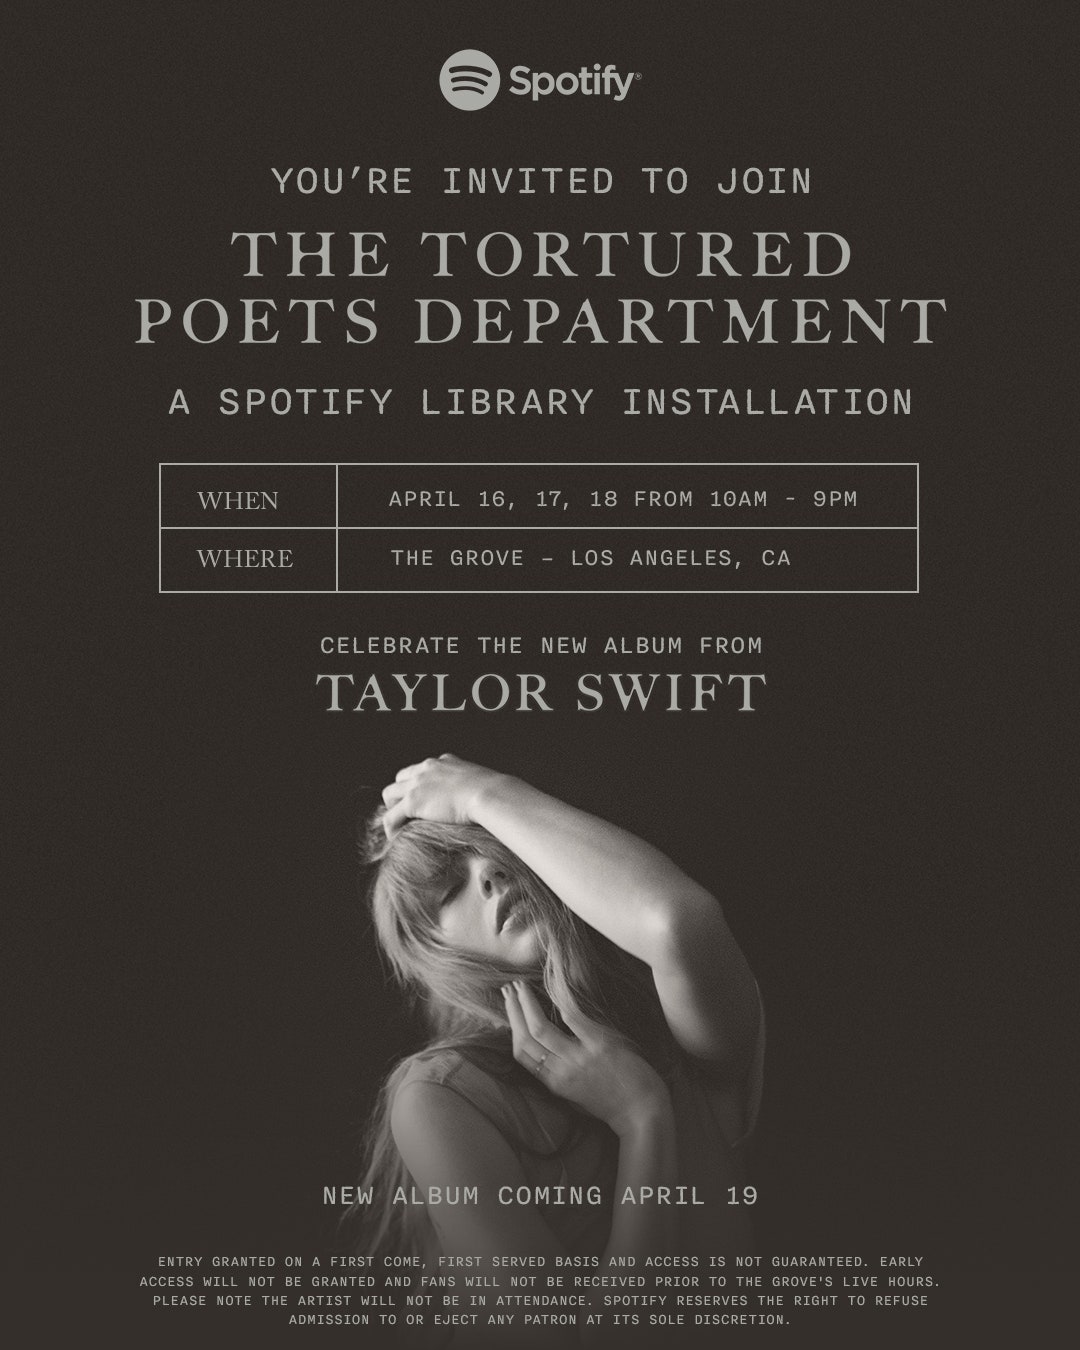 taylor swift to launch pop-up poetry library for tortured poets department album release with spotify